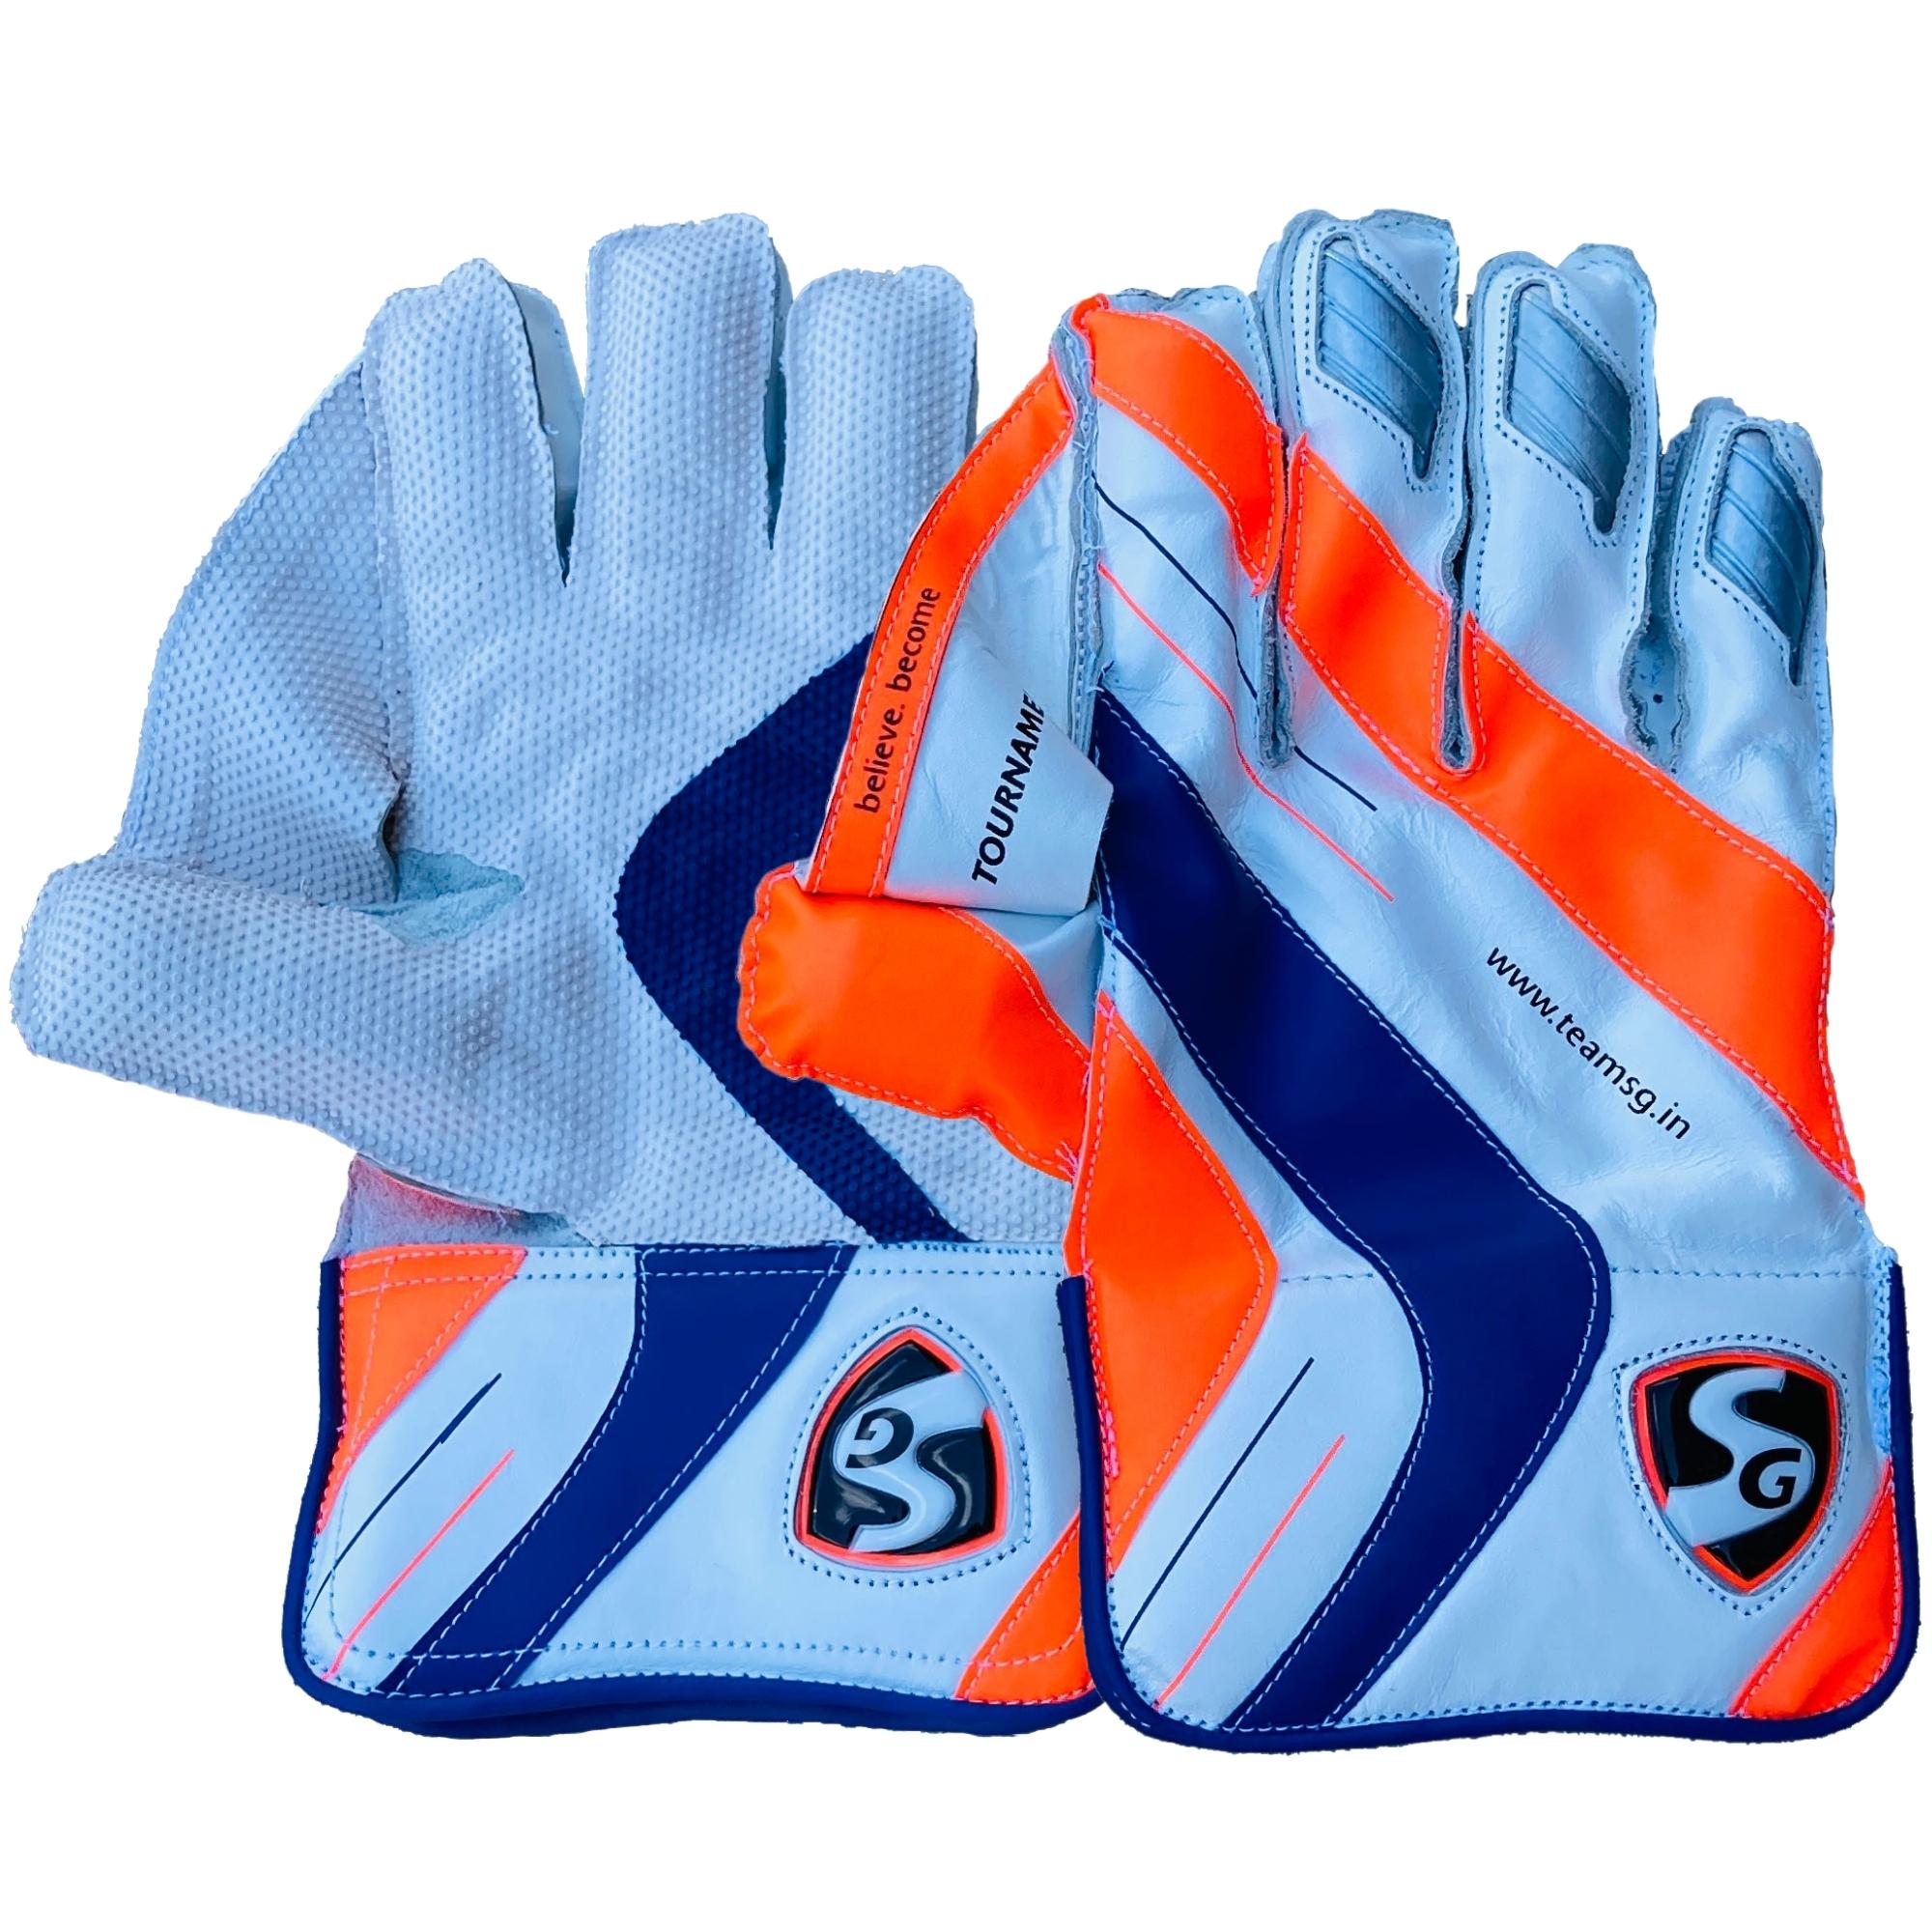 SG Wicket Keeping Gloves | SG Tournament